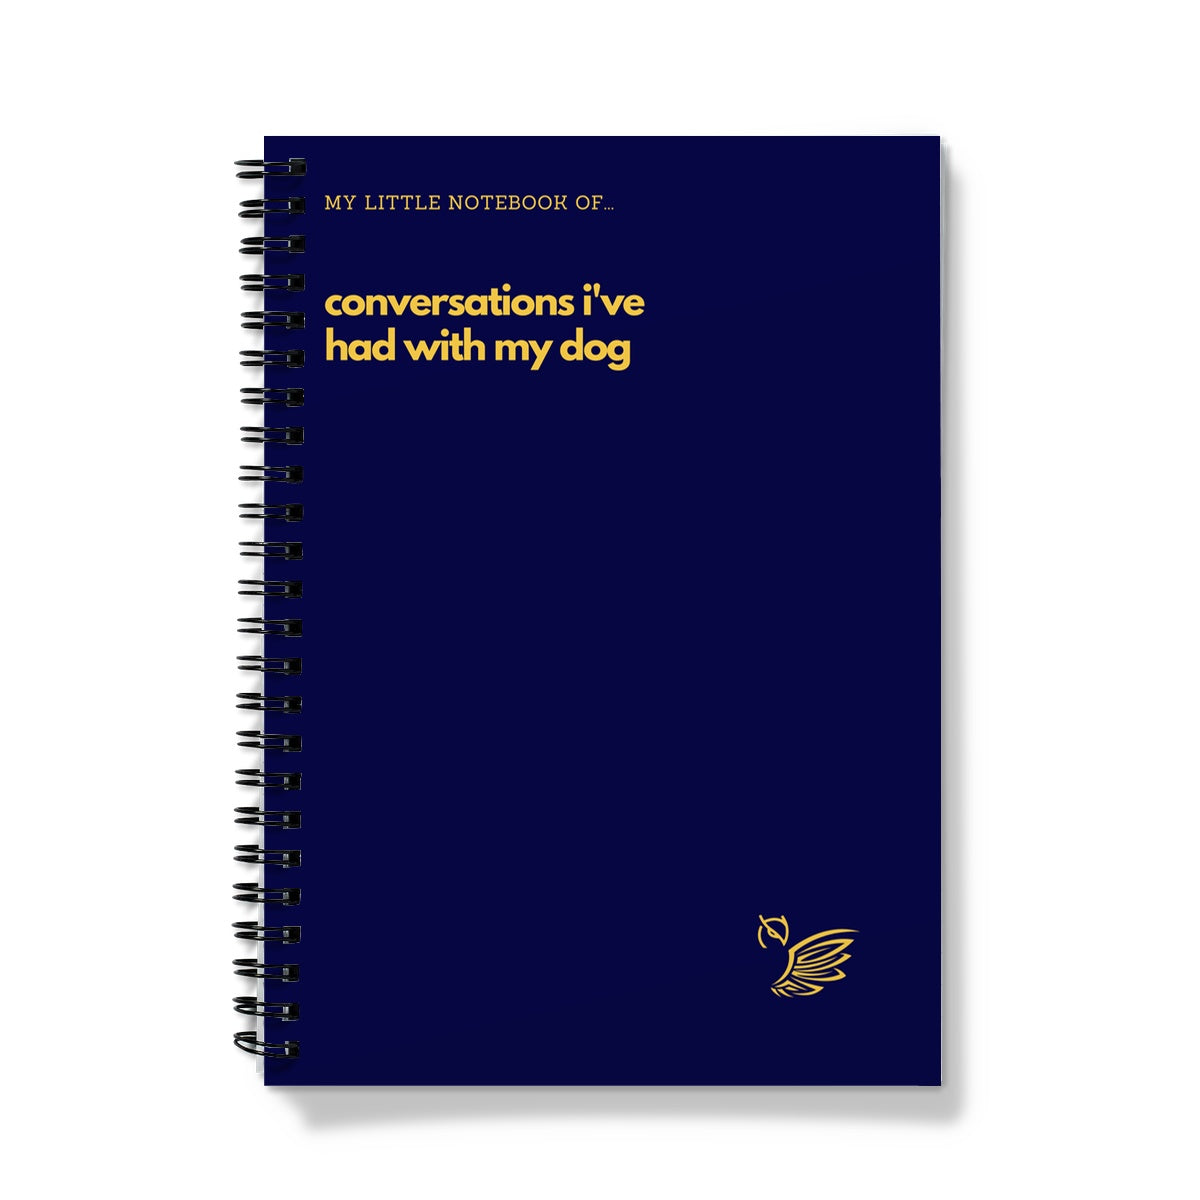 My Little Notebook Of... Conversations I've Had With My Dog Notebook